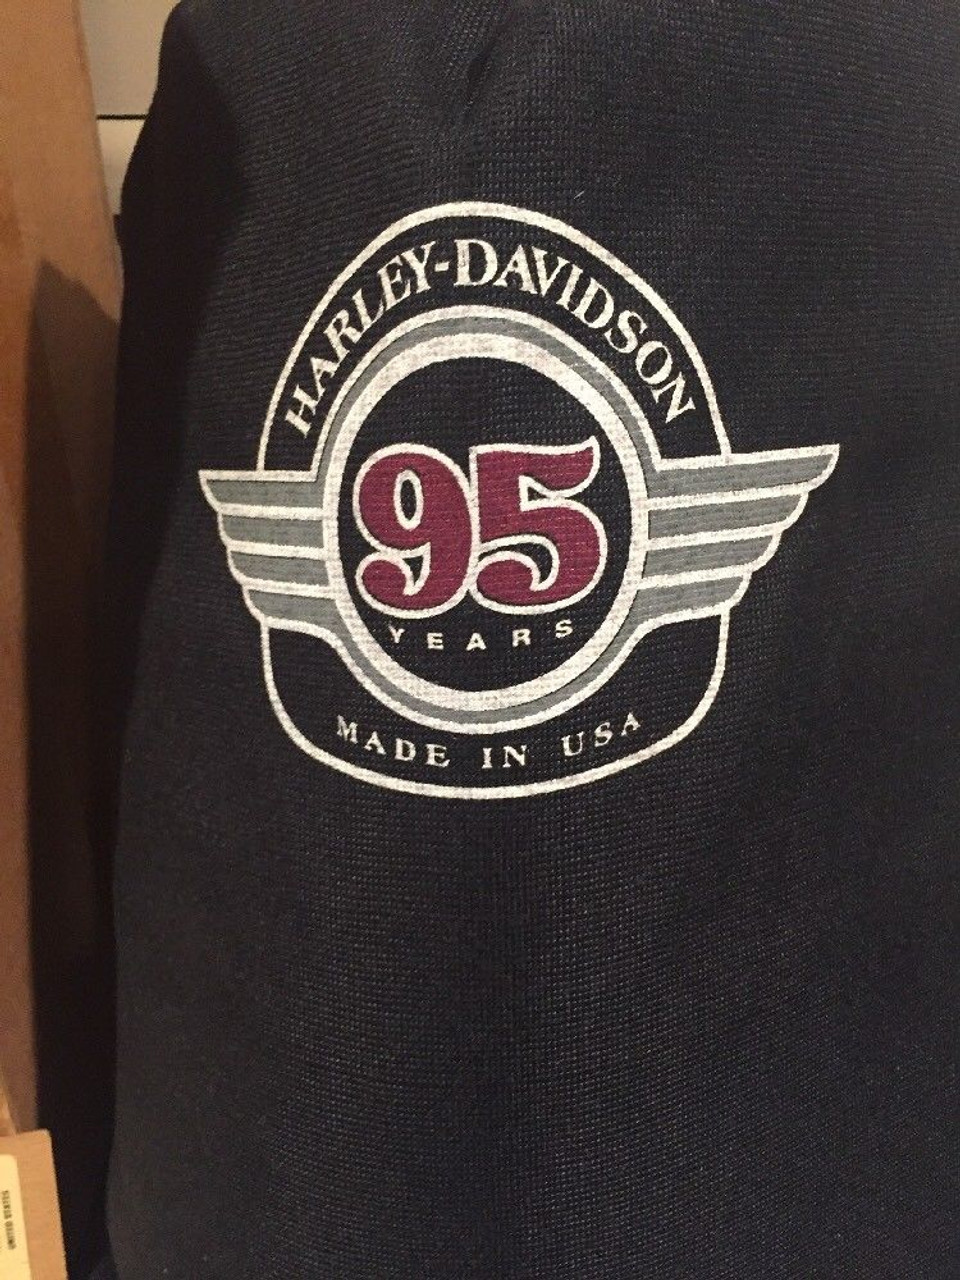 NOS HARLEY-DAVIDSON 95TH ANNIVERSARY INDOOR MOTORCYCLE COVER W/BAG # 91760-98